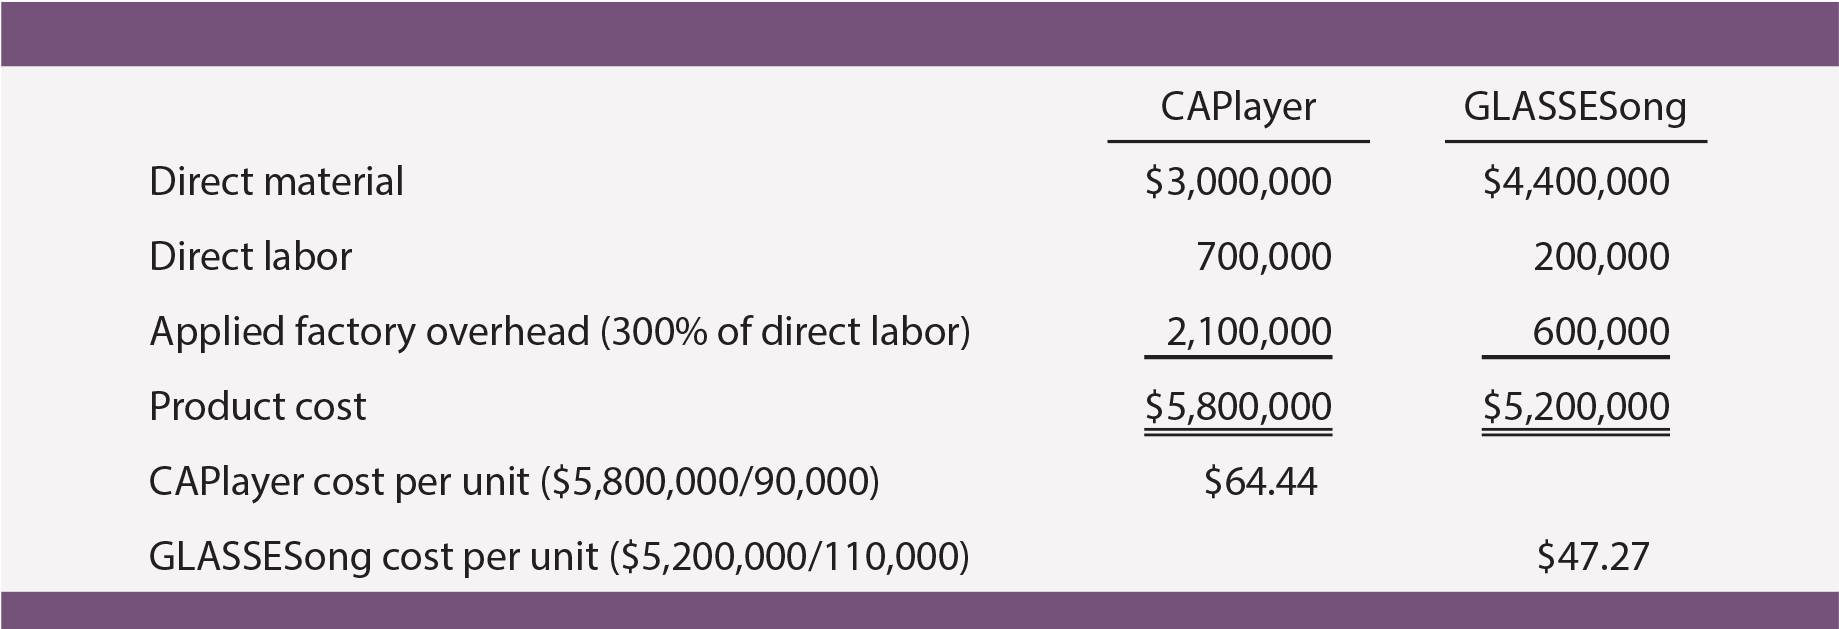 Cost of Production Analysis